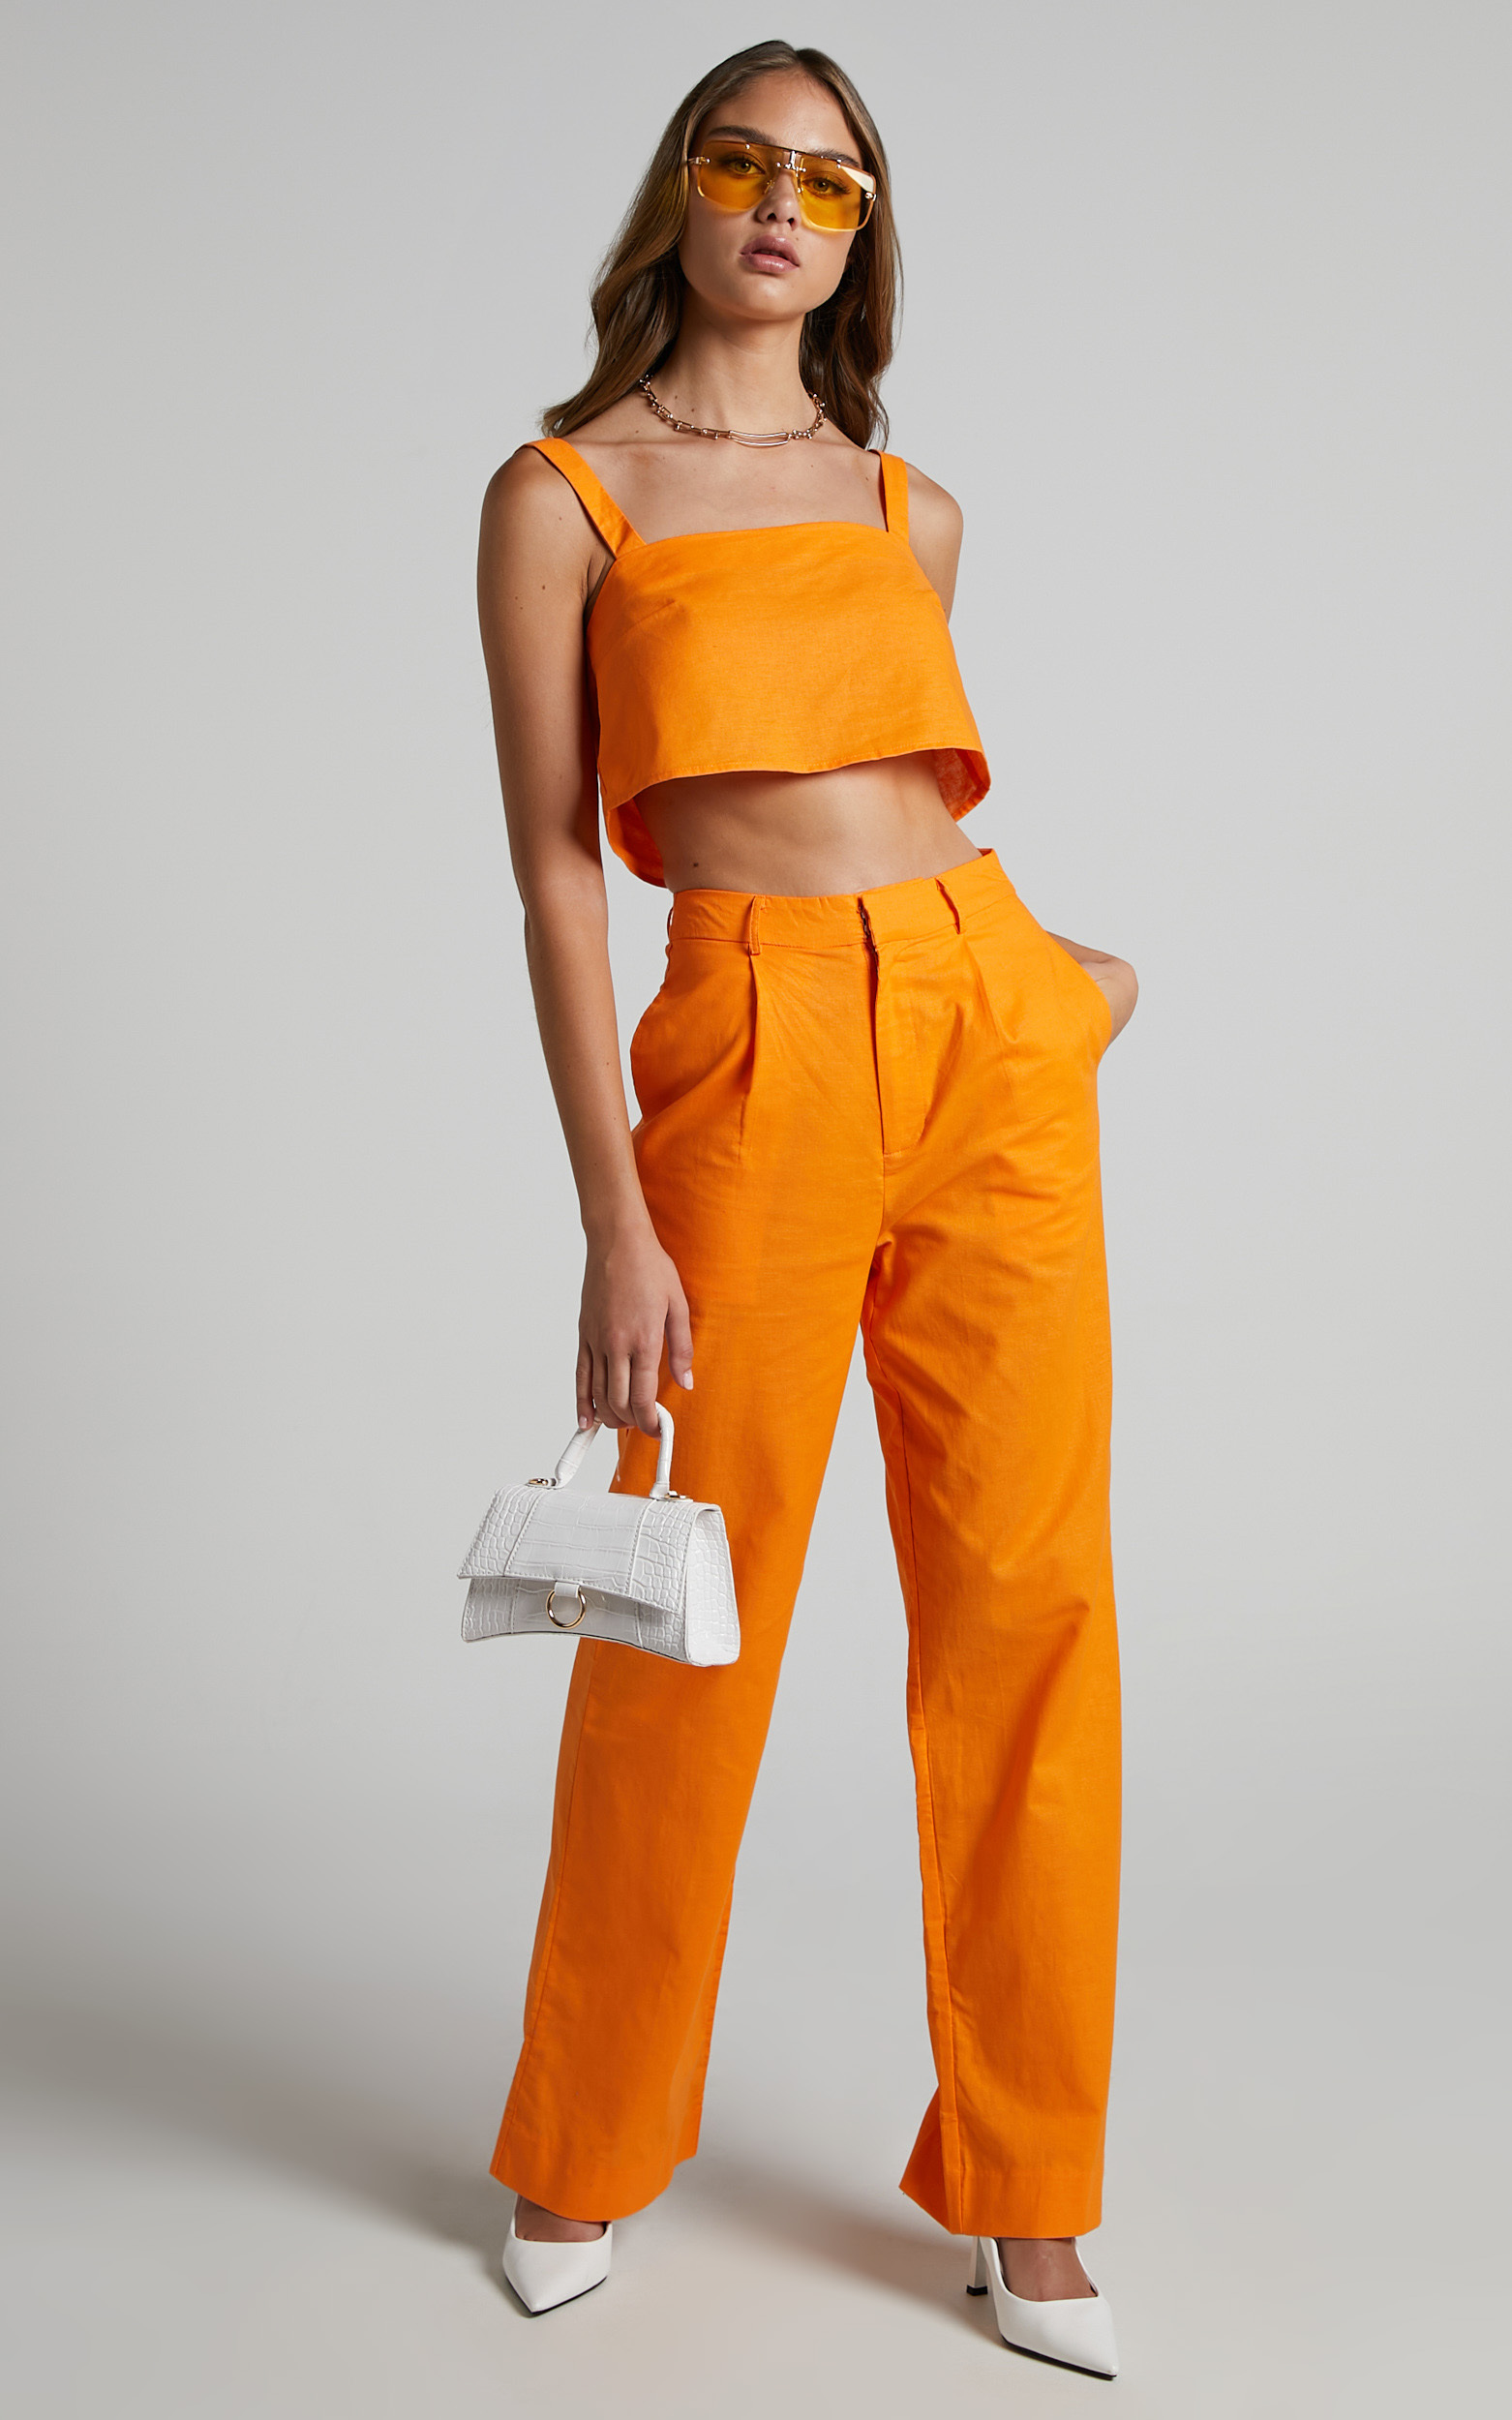 Claudina Two Piece Set - Cropped Cami Top and Relaxed Pant in Bright Orange - 06, ORG1, hi-res image number null